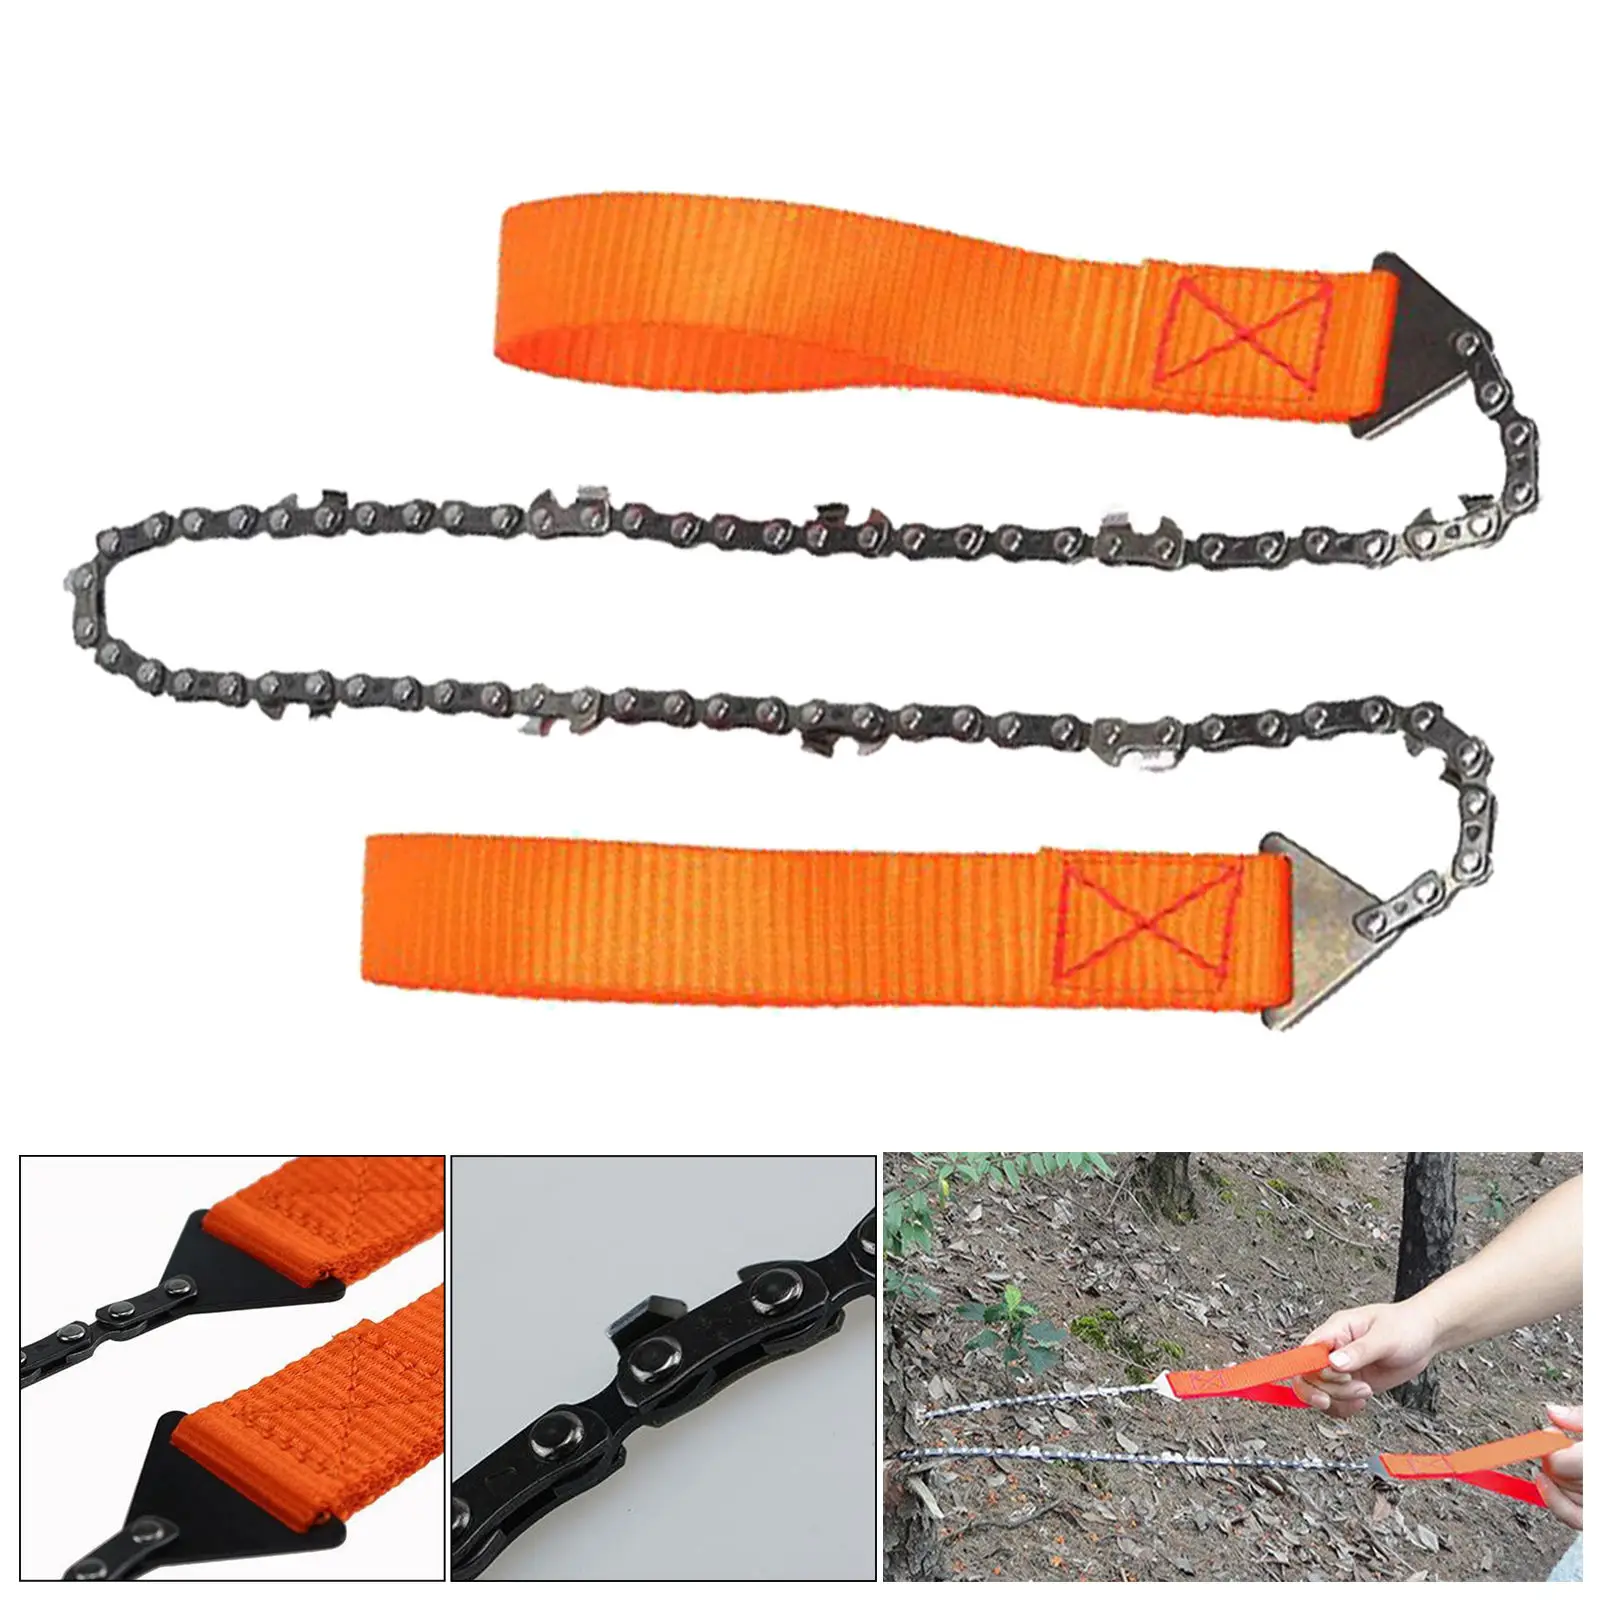 Survival Chainsaws Hand Cutting Tools for Outdoor Emergency Saws Scouts